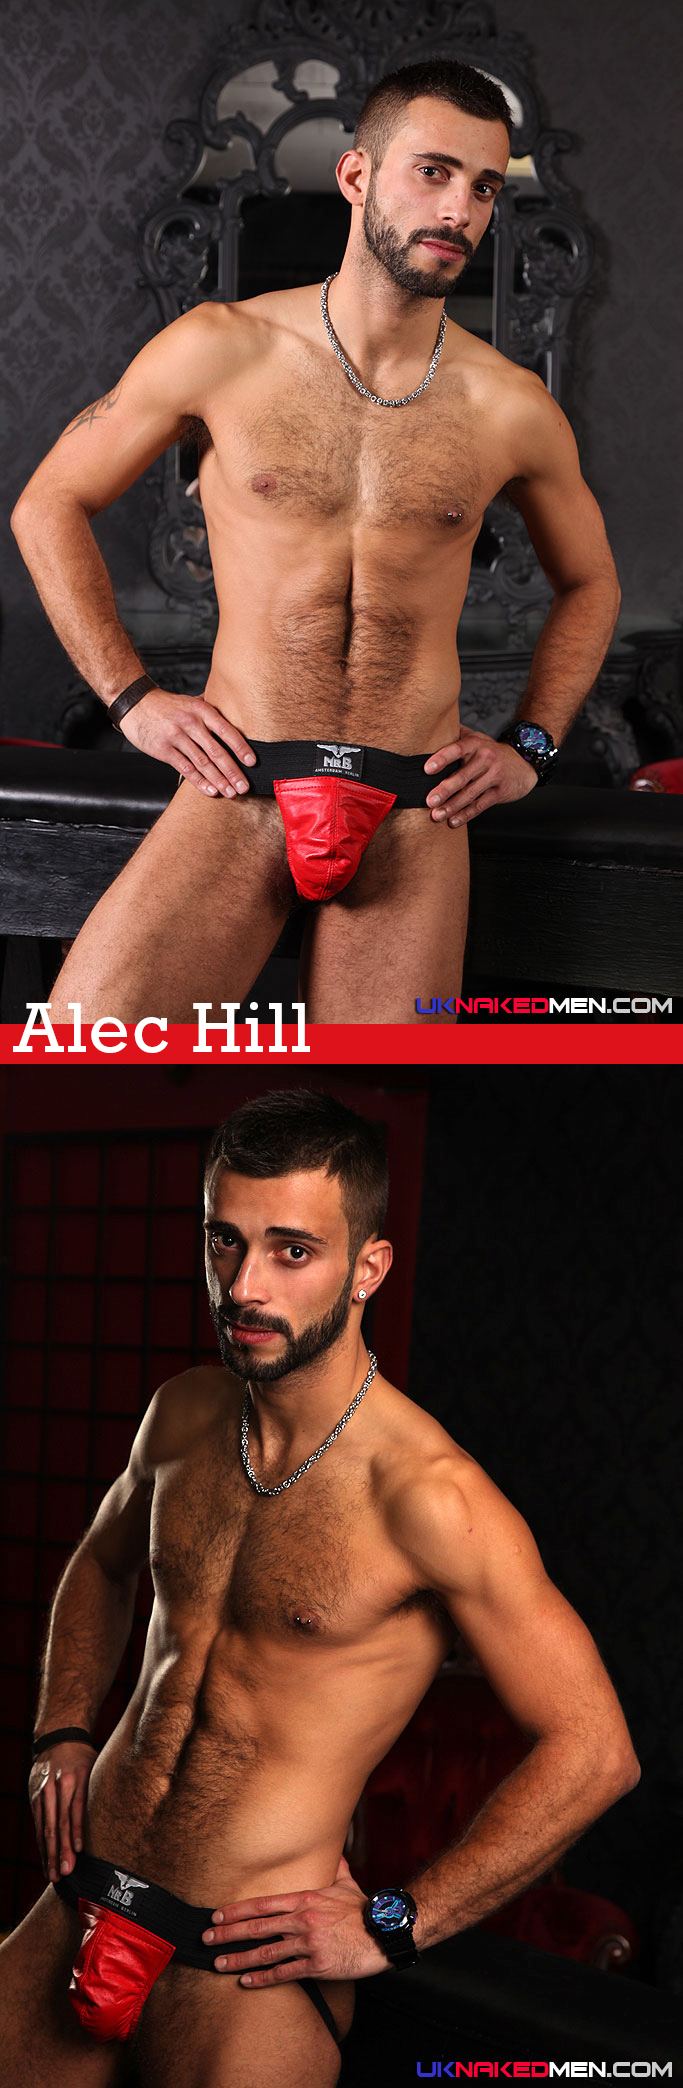 Alec Hill in a Red Leather Jockstrap